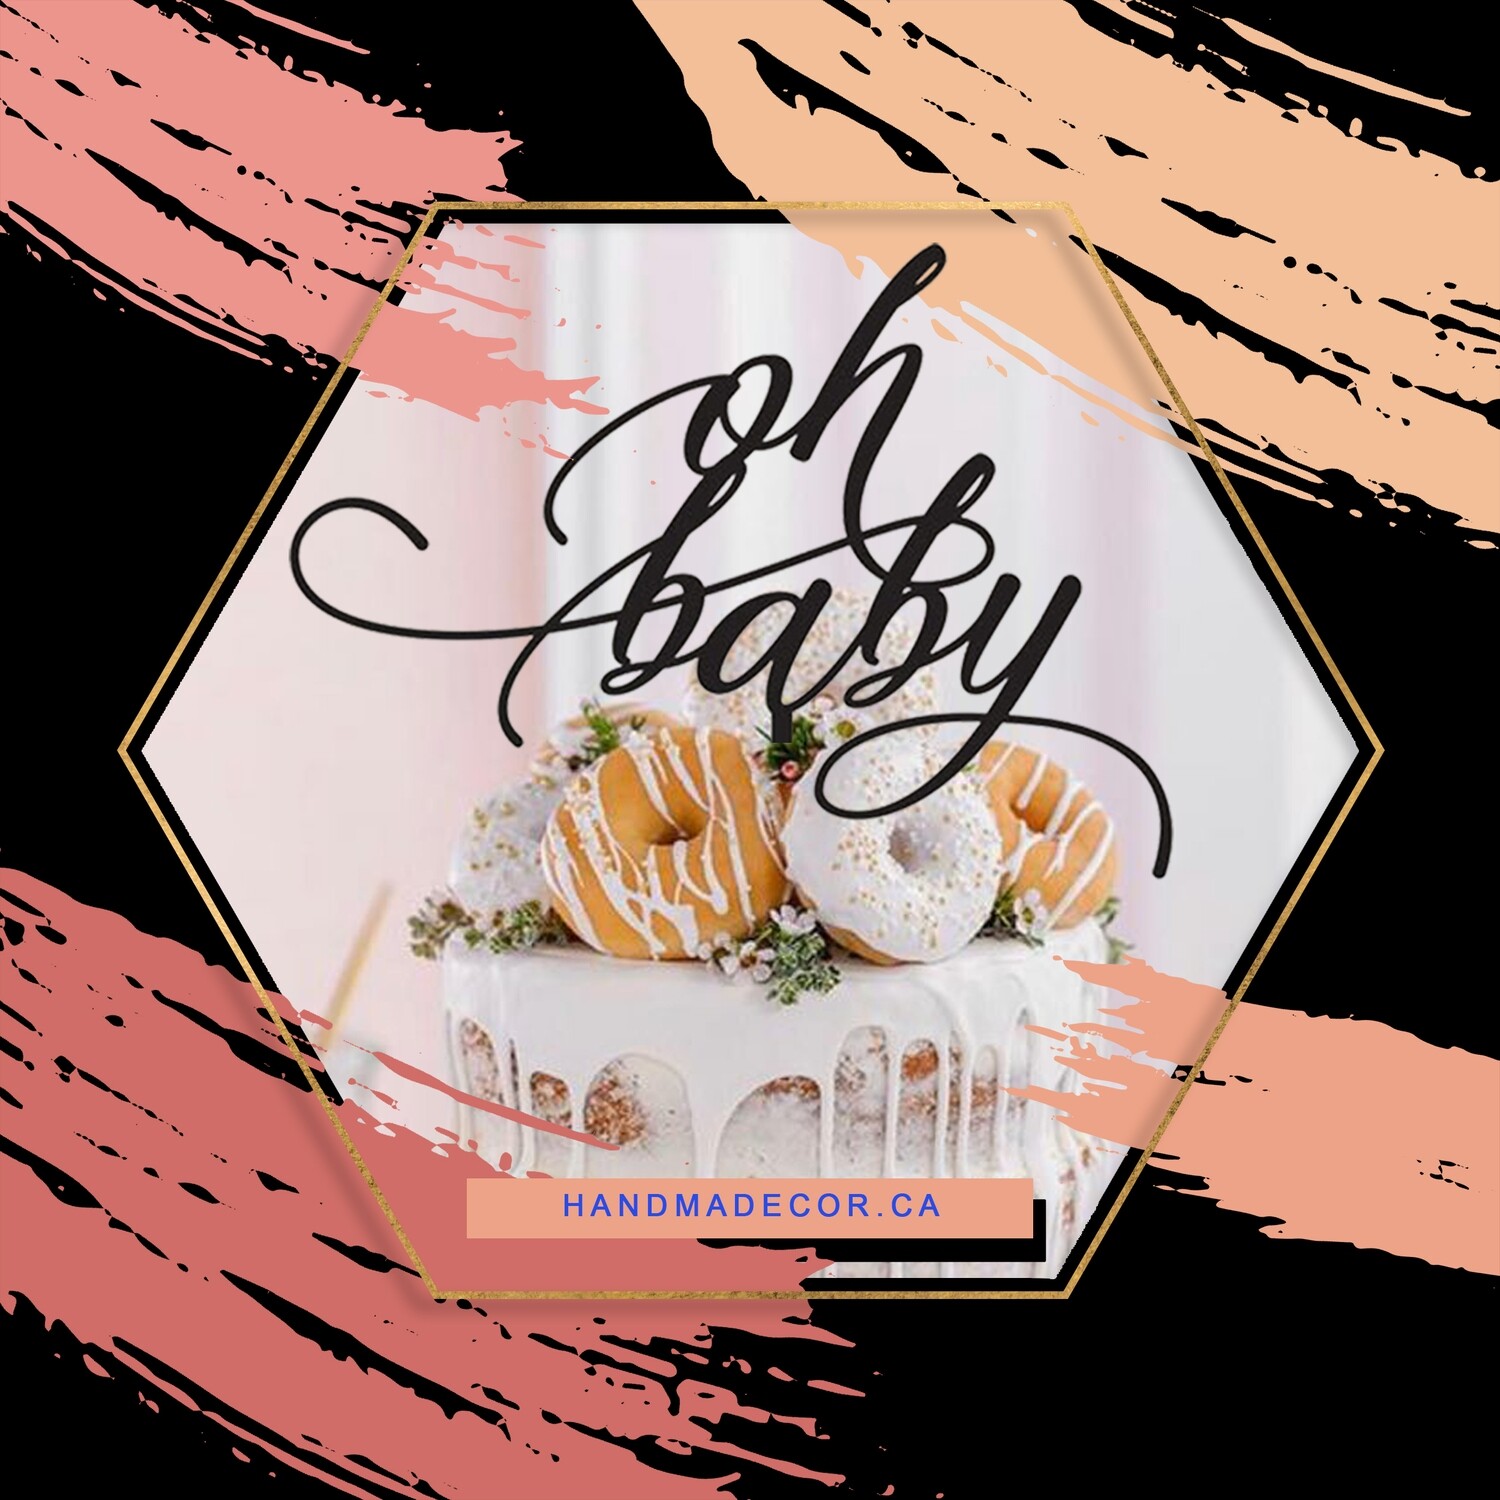 Oh baby Cake Topper - Reveal Cake topper